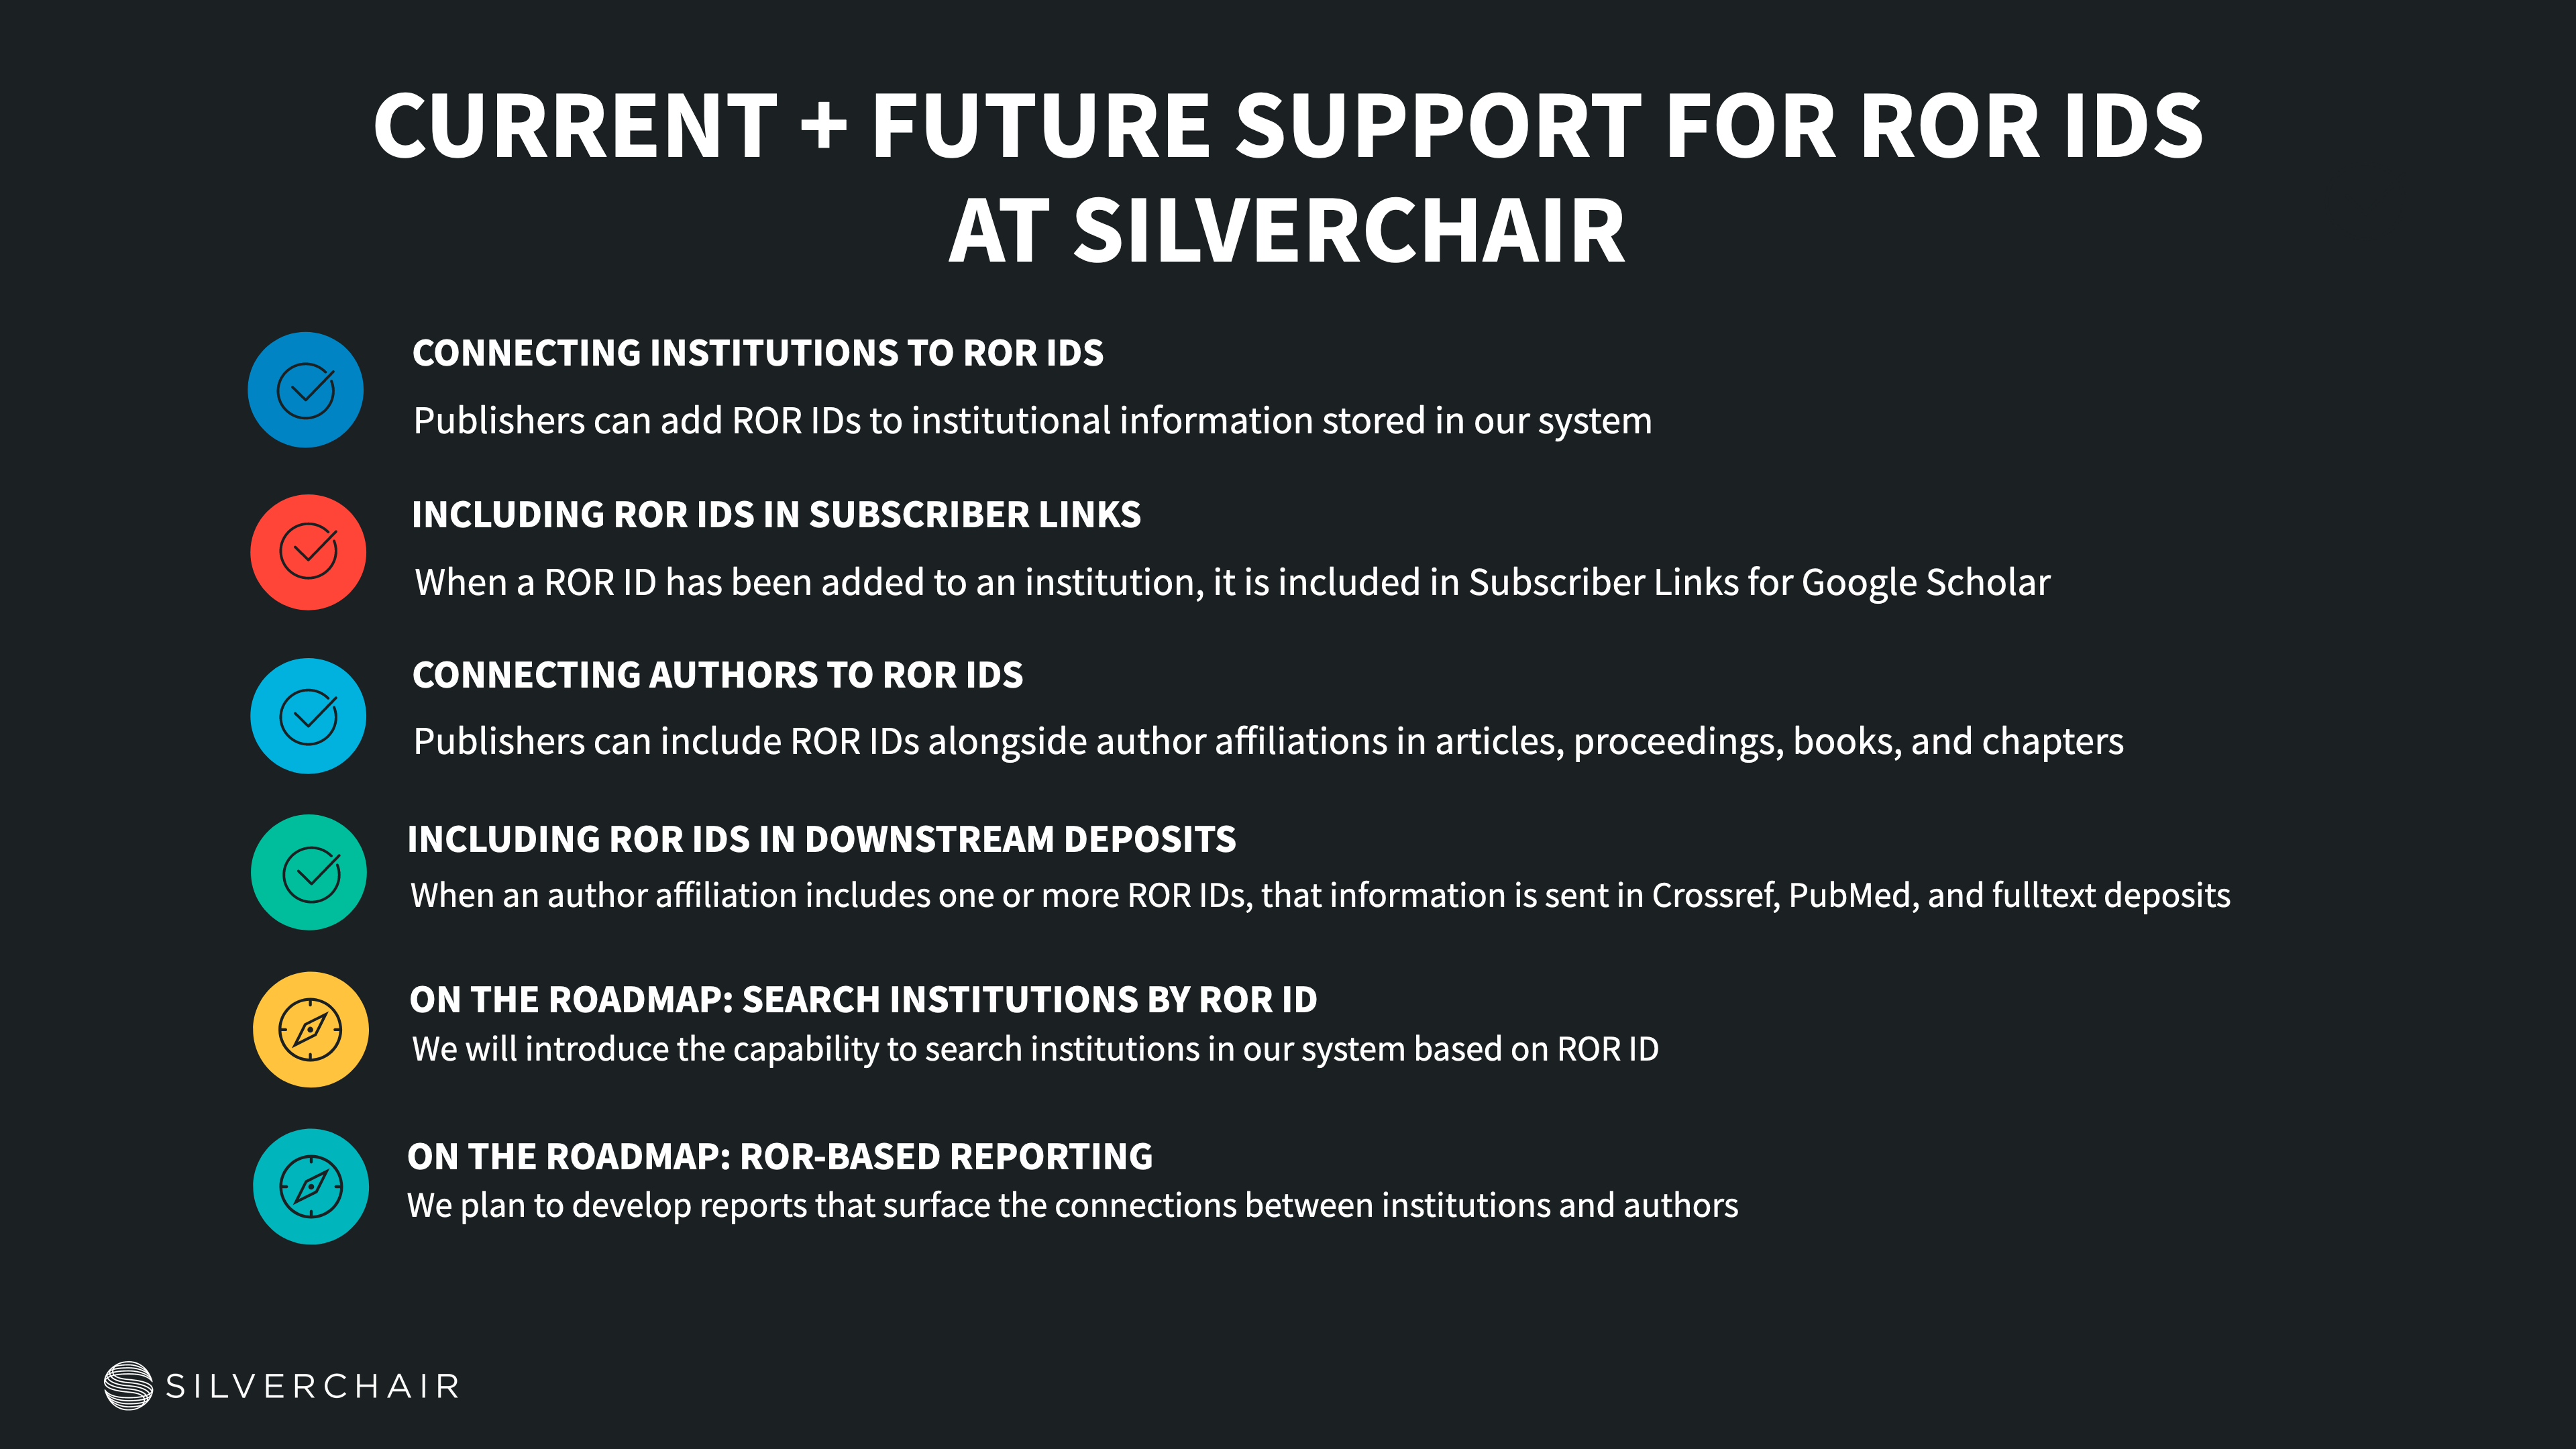 Current + future support for ROR IDs at Silverchair: Publishers can add ROR IDs to institutional information stored in our system; when a ROR ID has been added to an institution, it is included in Subscriber Links for Google Scholar; publishers can include ROR IDs alongside author affiliations in articles, proceedings, books, and chapters; when an author affiliation includes one or more ROR IDs, that information is sent in Crossref, PubMed, and fulltext deposits; on the roadmap, we will introduce the capability to search institutions in our system based on ROR ID, and we plan to develop reports that surface the connections between institutions and authors